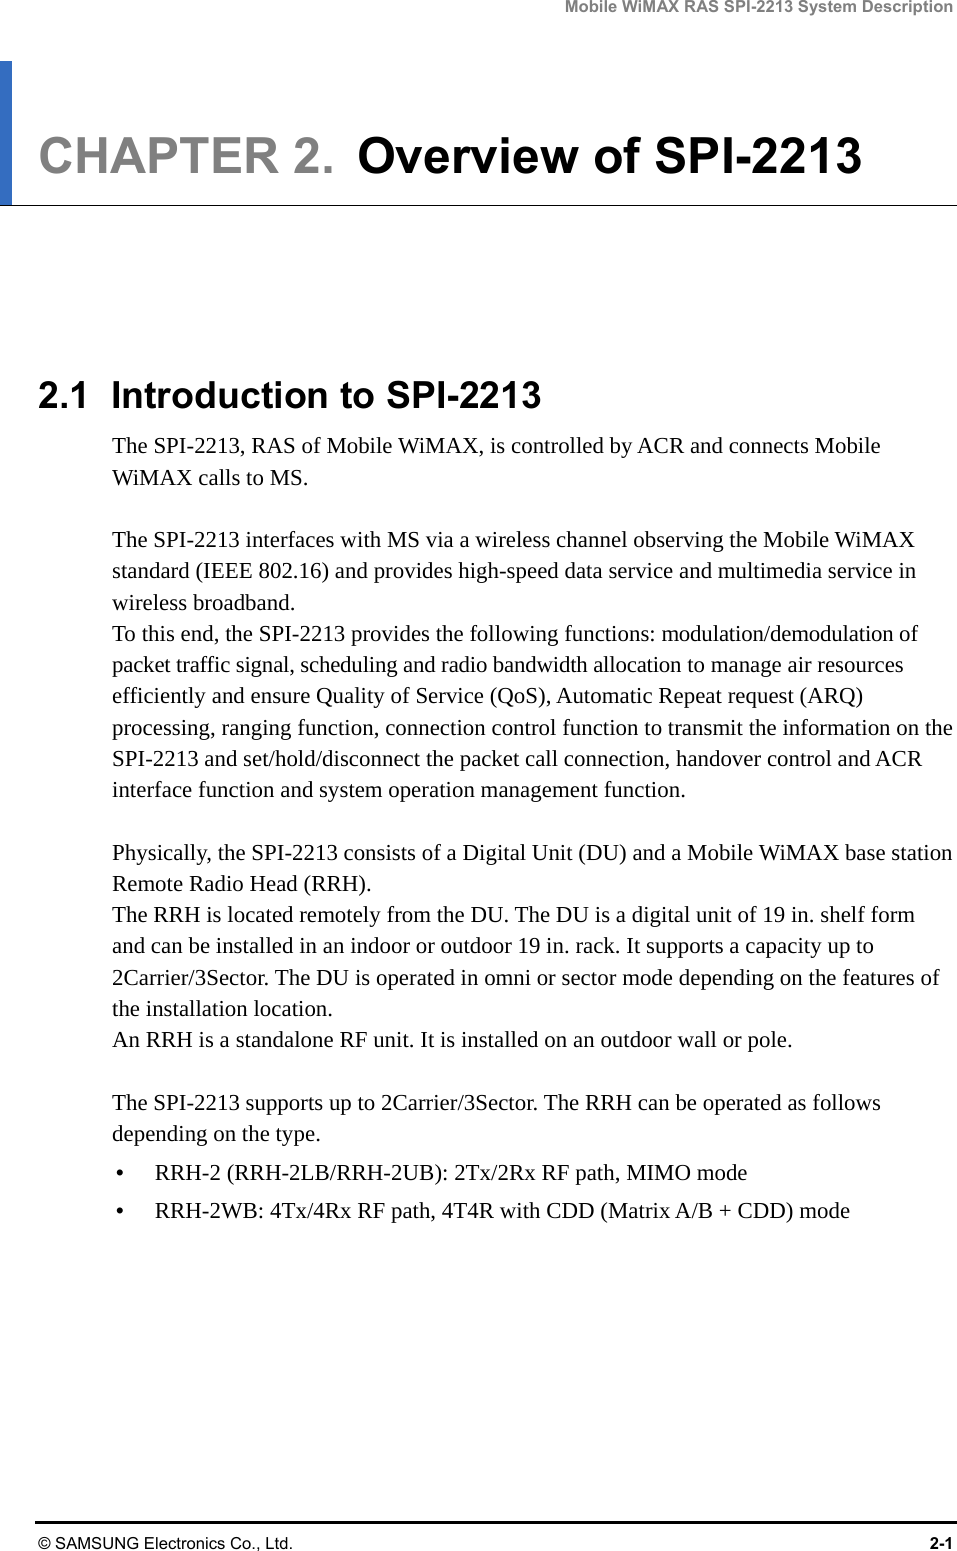 Mobile WiMAX RAS SPI-2213 System Description © SAMSUNG Electronics Co., Ltd.  2-1 CHAPTER 2.  Overview of SPI-2213      2.1 Introduction to SPI-2213 The SPI-2213, RAS of Mobile WiMAX, is controlled by ACR and connects Mobile WiMAX calls to MS.  The SPI-2213 interfaces with MS via a wireless channel observing the Mobile WiMAX standard (IEEE 802.16) and provides high-speed data service and multimedia service in wireless broadband. To this end, the SPI-2213 provides the following functions: modulation/demodulation of packet traffic signal, scheduling and radio bandwidth allocation to manage air resources efficiently and ensure Quality of Service (QoS), Automatic Repeat request (ARQ) processing, ranging function, connection control function to transmit the information on the SPI-2213 and set/hold/disconnect the packet call connection, handover control and ACR interface function and system operation management function.  Physically, the SPI-2213 consists of a Digital Unit (DU) and a Mobile WiMAX base station Remote Radio Head (RRH). The RRH is located remotely from the DU. The DU is a digital unit of 19 in. shelf form and can be installed in an indoor or outdoor 19 in. rack. It supports a capacity up to 2Carrier/3Sector. The DU is operated in omni or sector mode depending on the features of the installation location. An RRH is a standalone RF unit. It is installed on an outdoor wall or pole.  The SPI-2213 supports up to 2Carrier/3Sector. The RRH can be operated as follows depending on the type.   y RRH-2 (RRH-2LB/RRH-2UB): 2Tx/2Rx RF path, MIMO mode y RRH-2WB: 4Tx/4Rx RF path, 4T4R with CDD (Matrix A/B + CDD) mode   